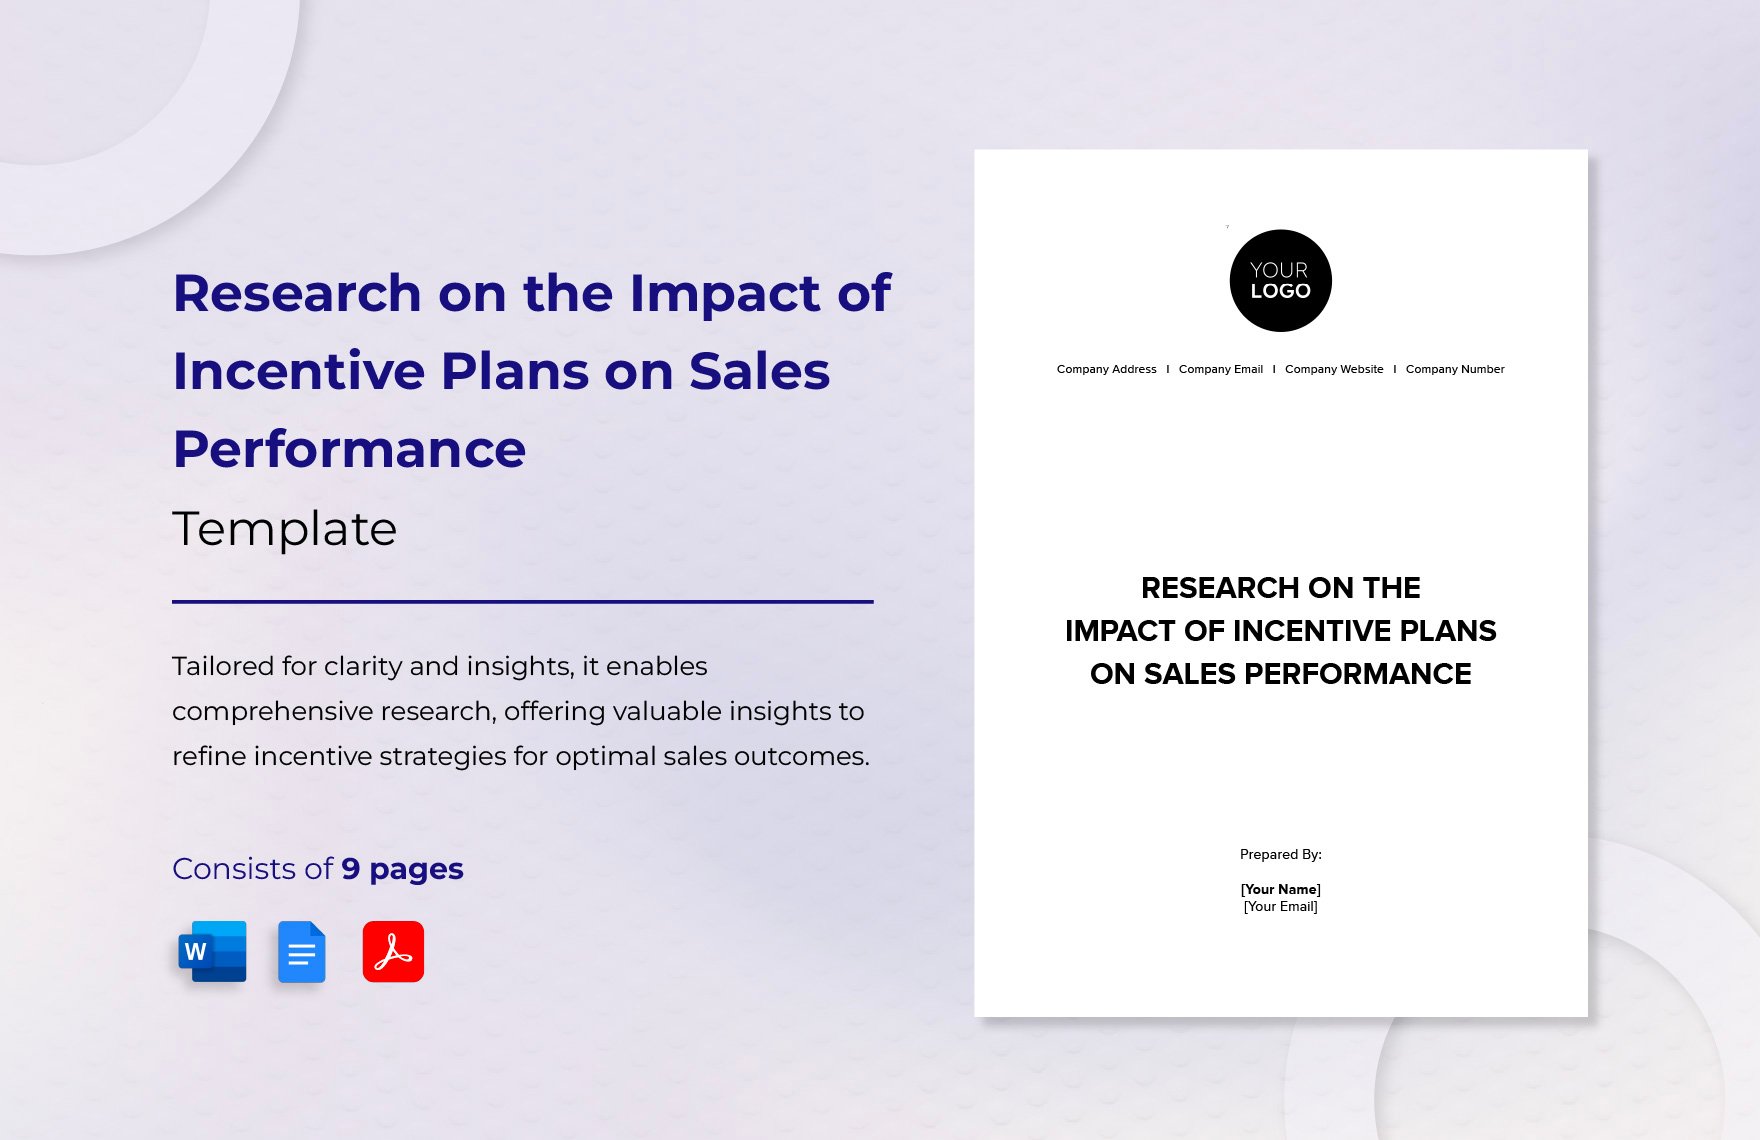 Research on the Impact of Incentive Plans on Sales Performance Template